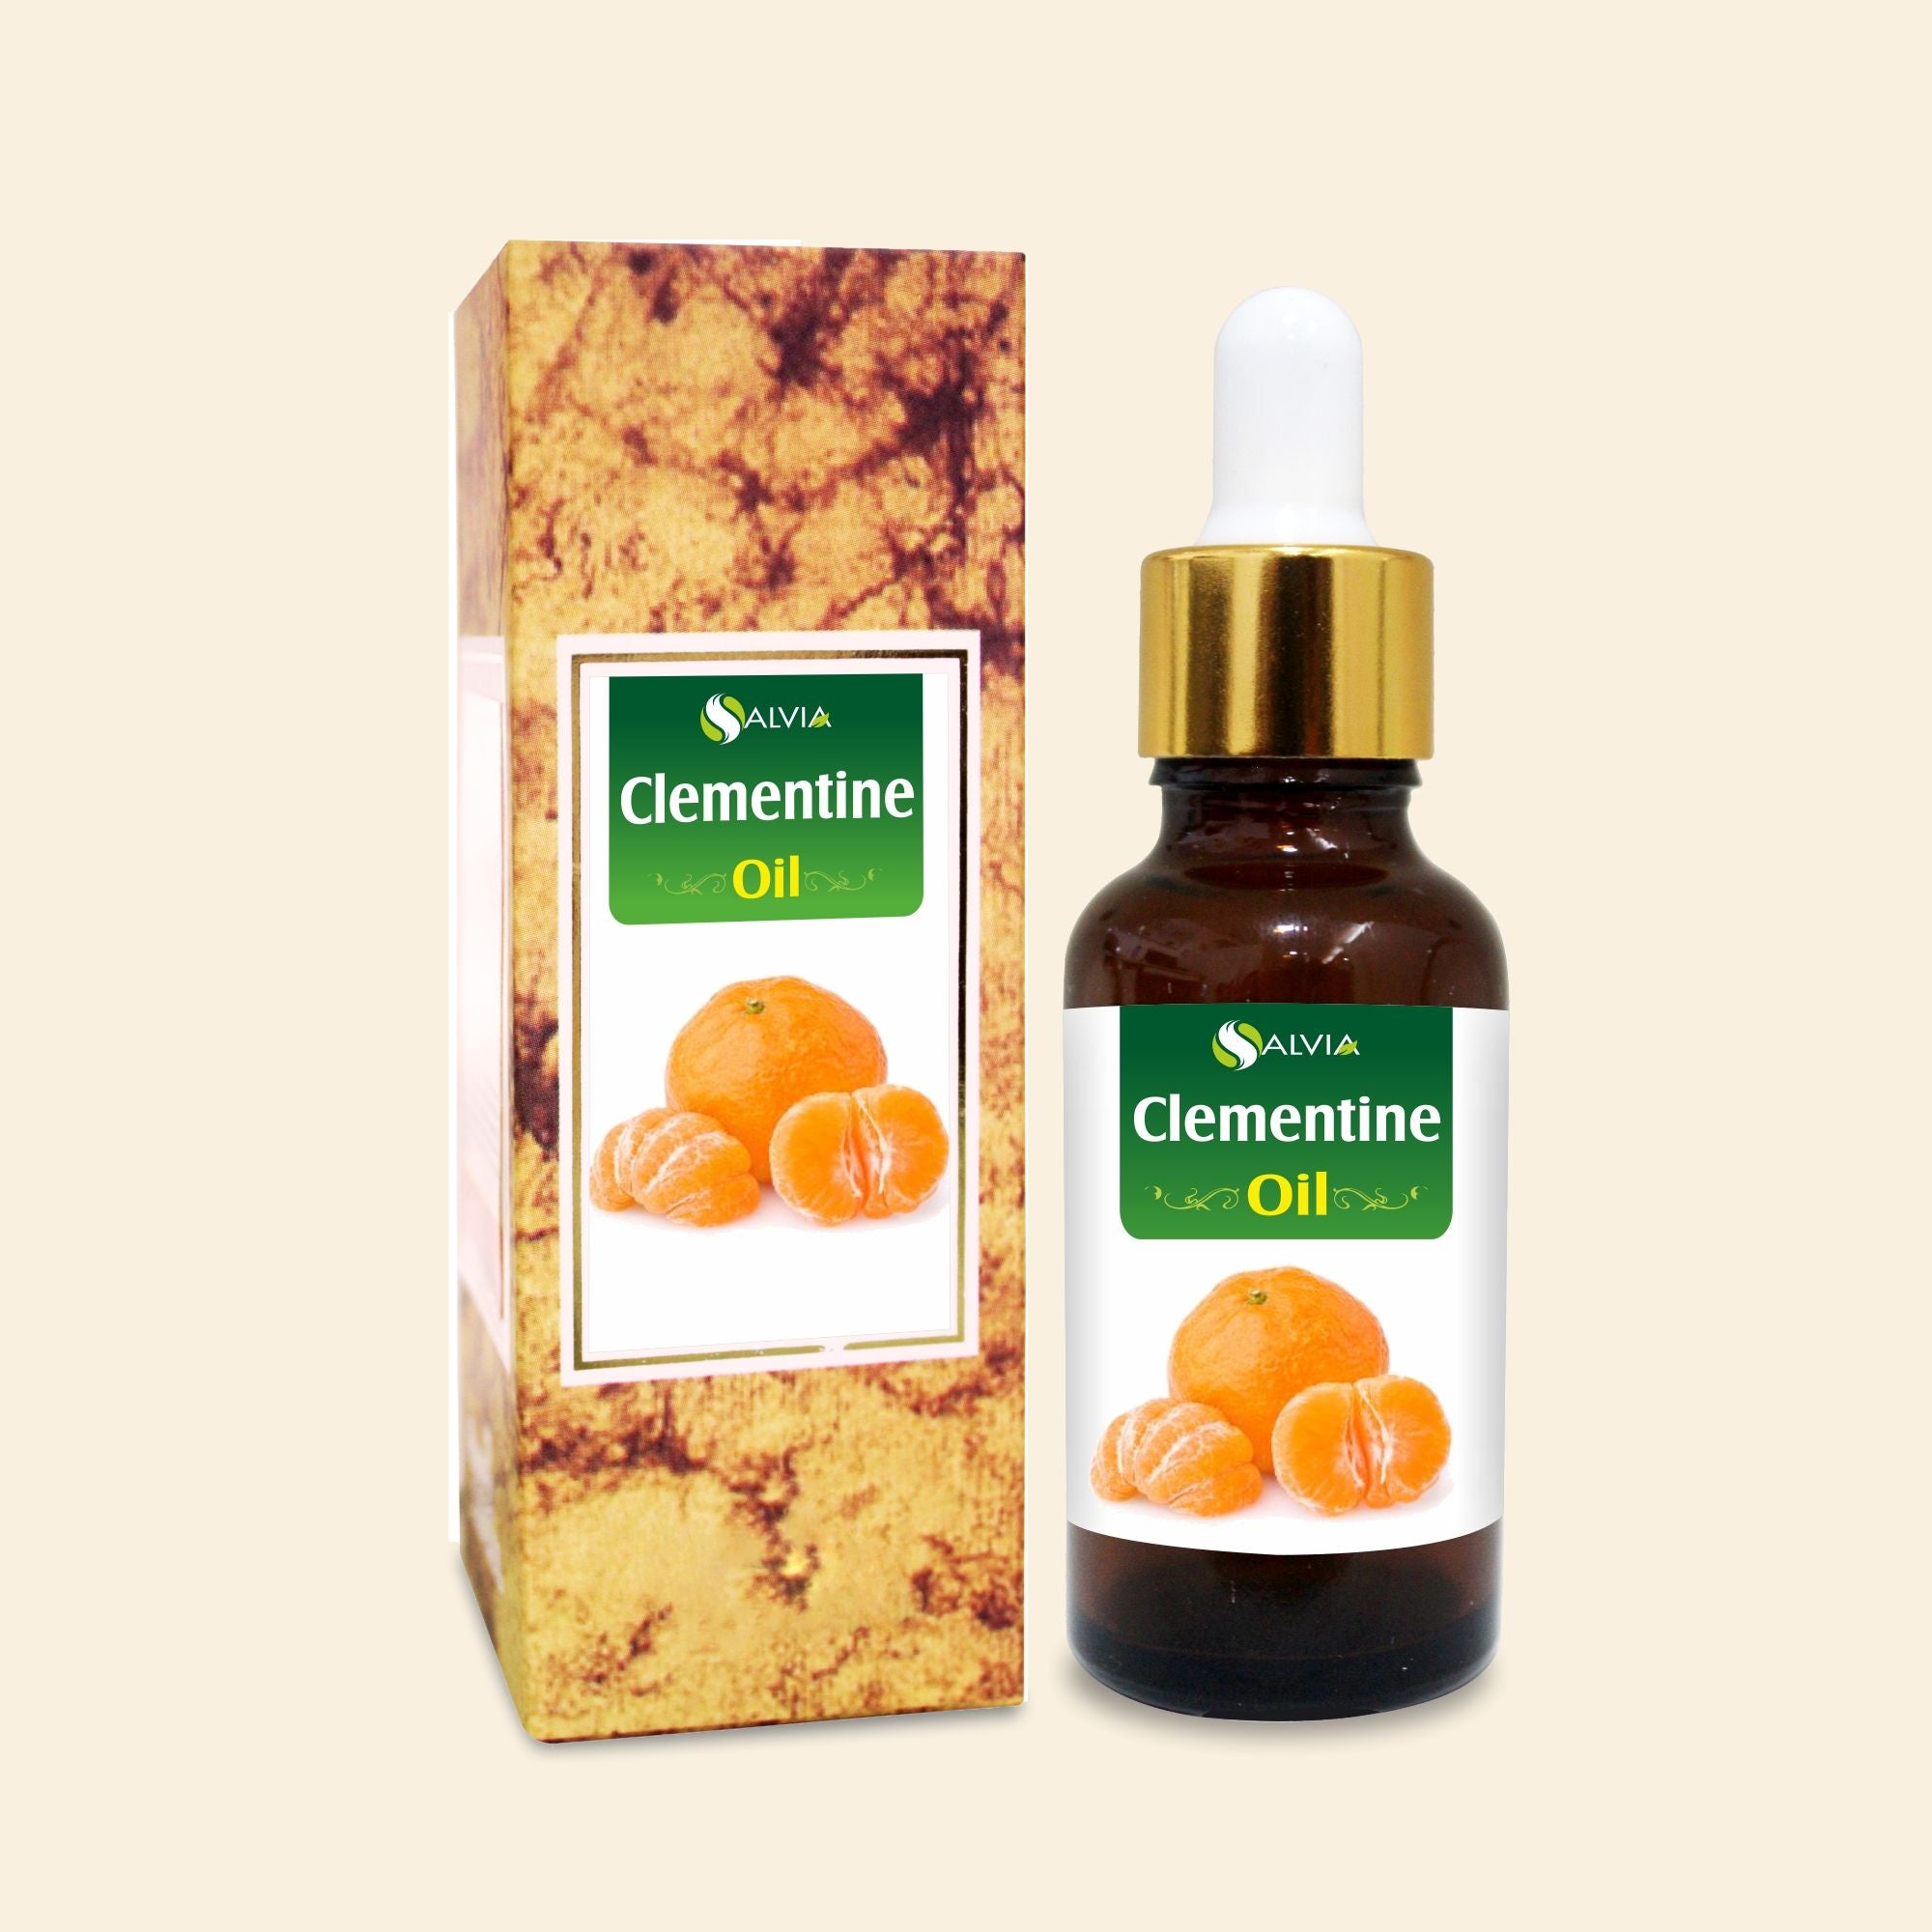 Salvia Natural Essential Oils Clementine Oil (Citrus-Clementine) 100% Natural Pure Essential Oil Brightens Skin, Elevates Positive Emotions, Purifies Air, Aromatherapy